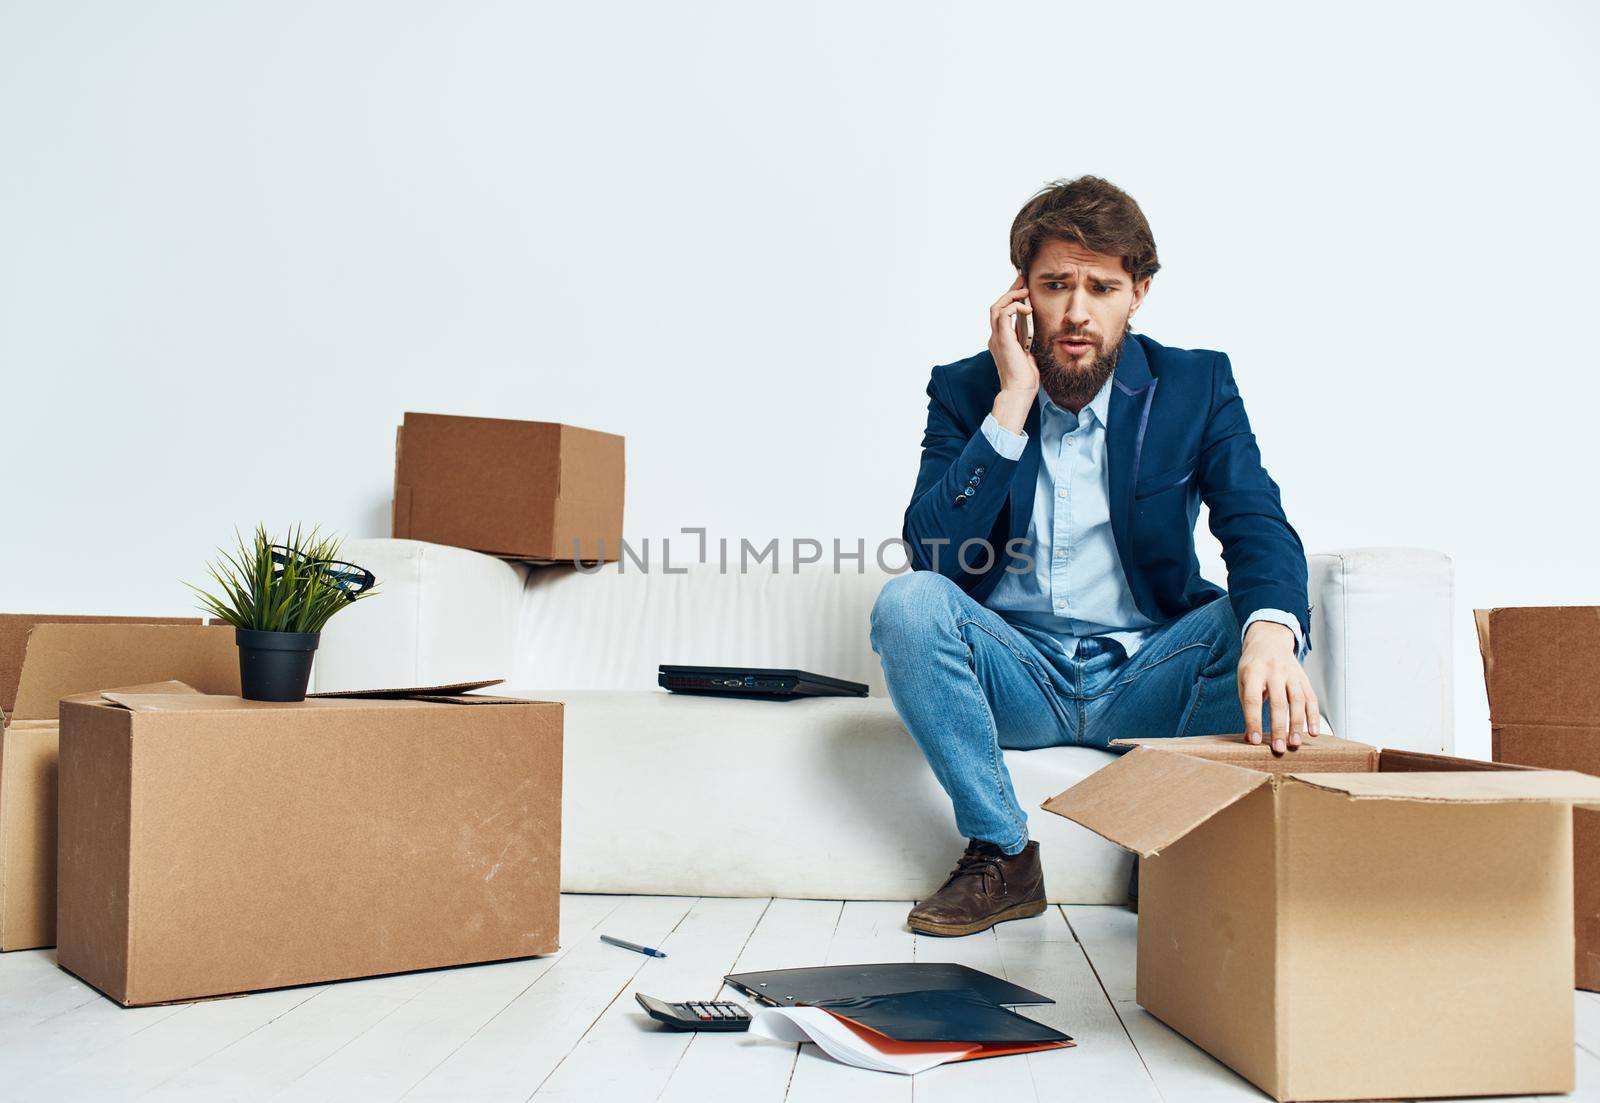 Business man with laptop sitting on sofa unpacking boxes official. High quality photo